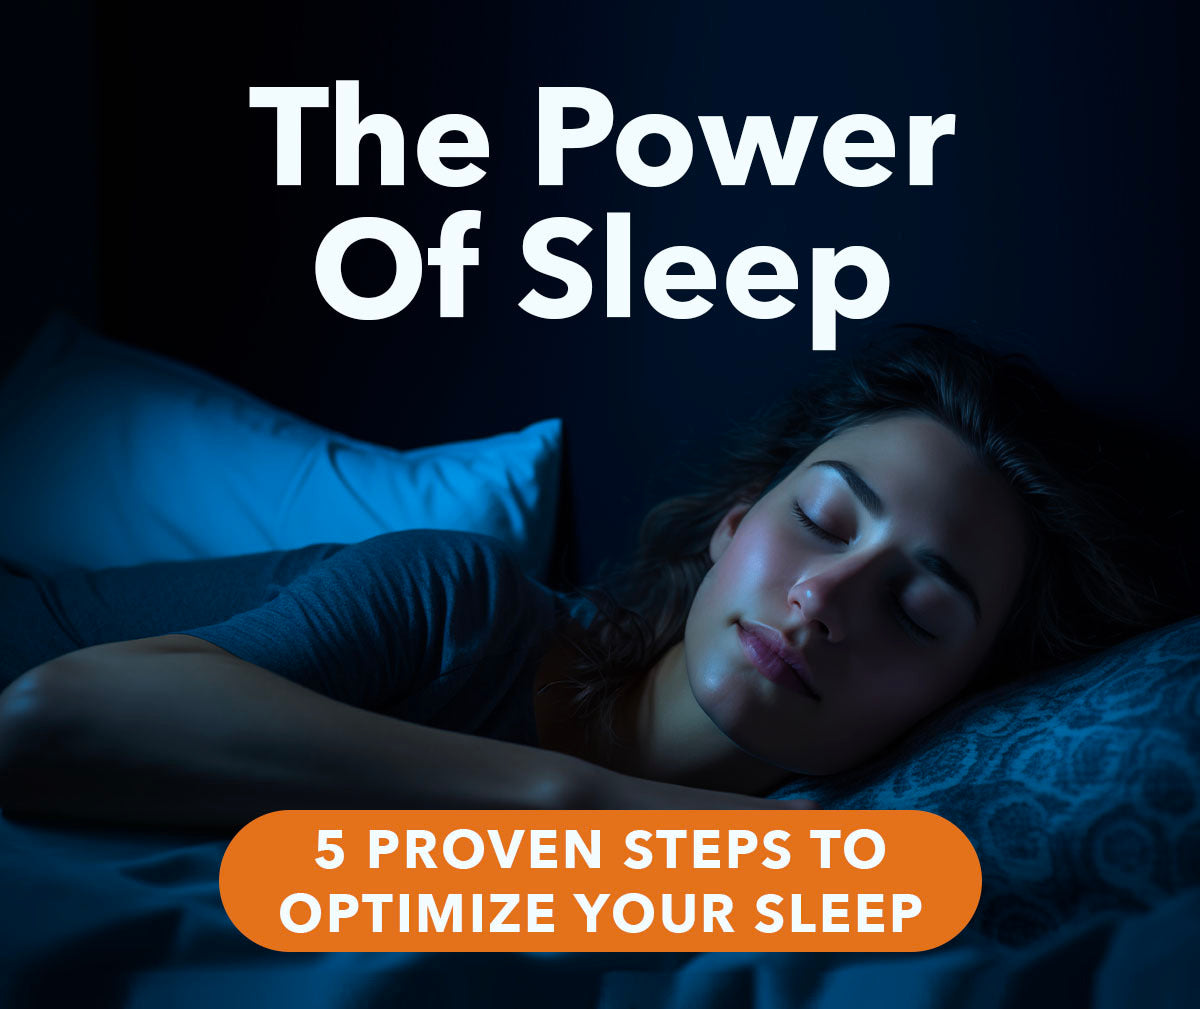 5 Proven Steps to Optimize Your Sleep